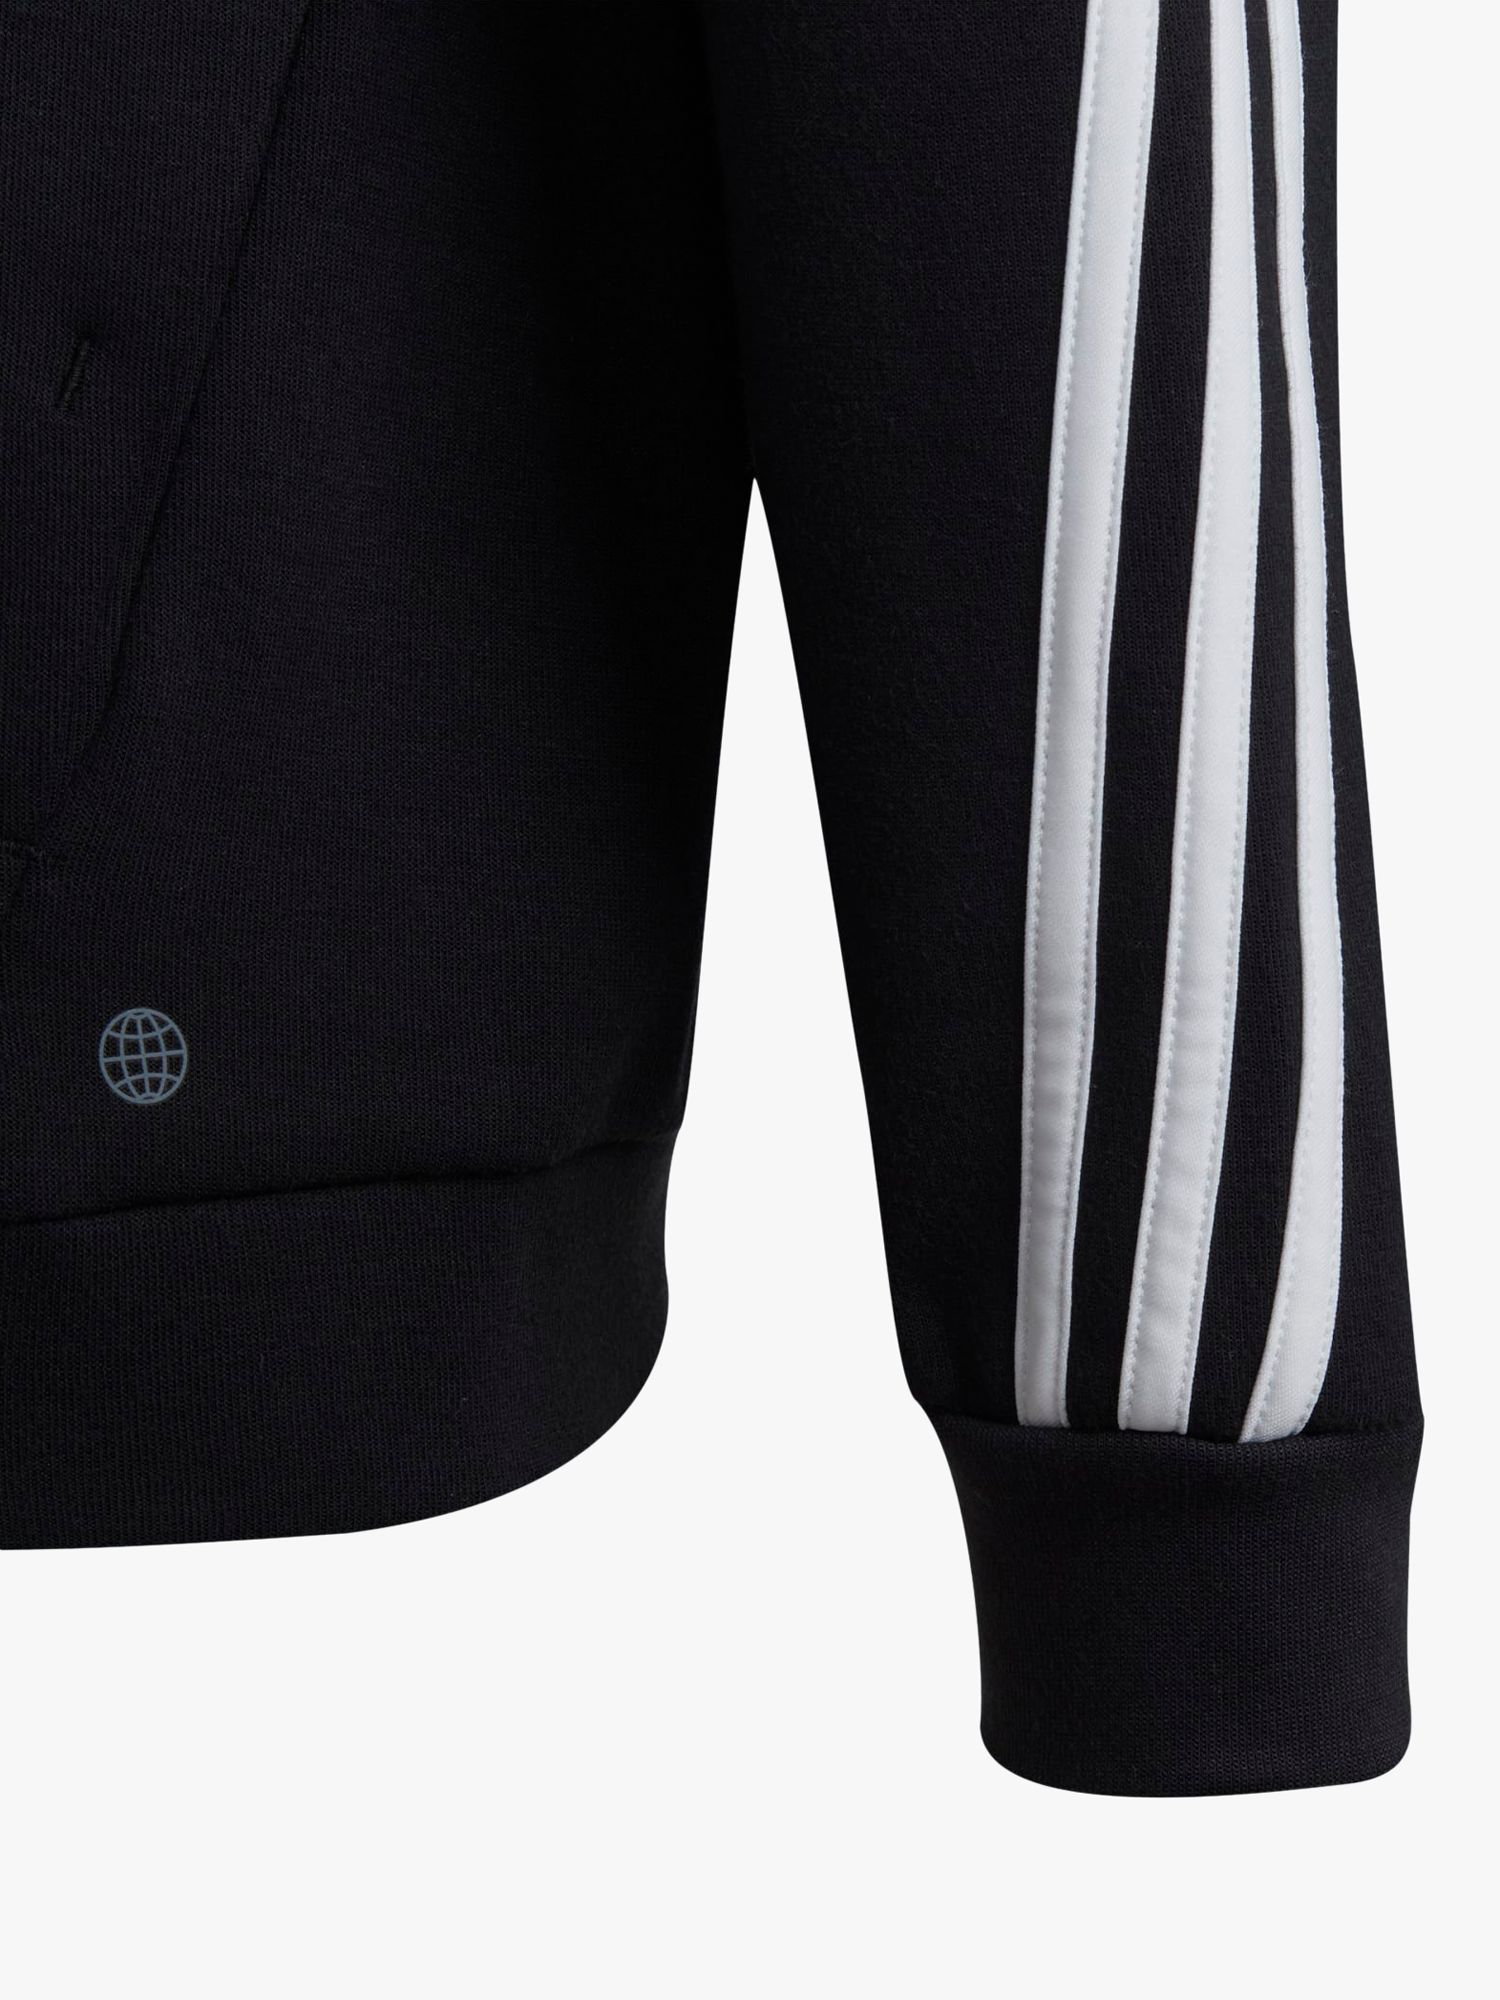 adidas Kids' Future Icons 3 Stripes Full Zip Hooded Tracksuit Top, Black/White, 13-14 years